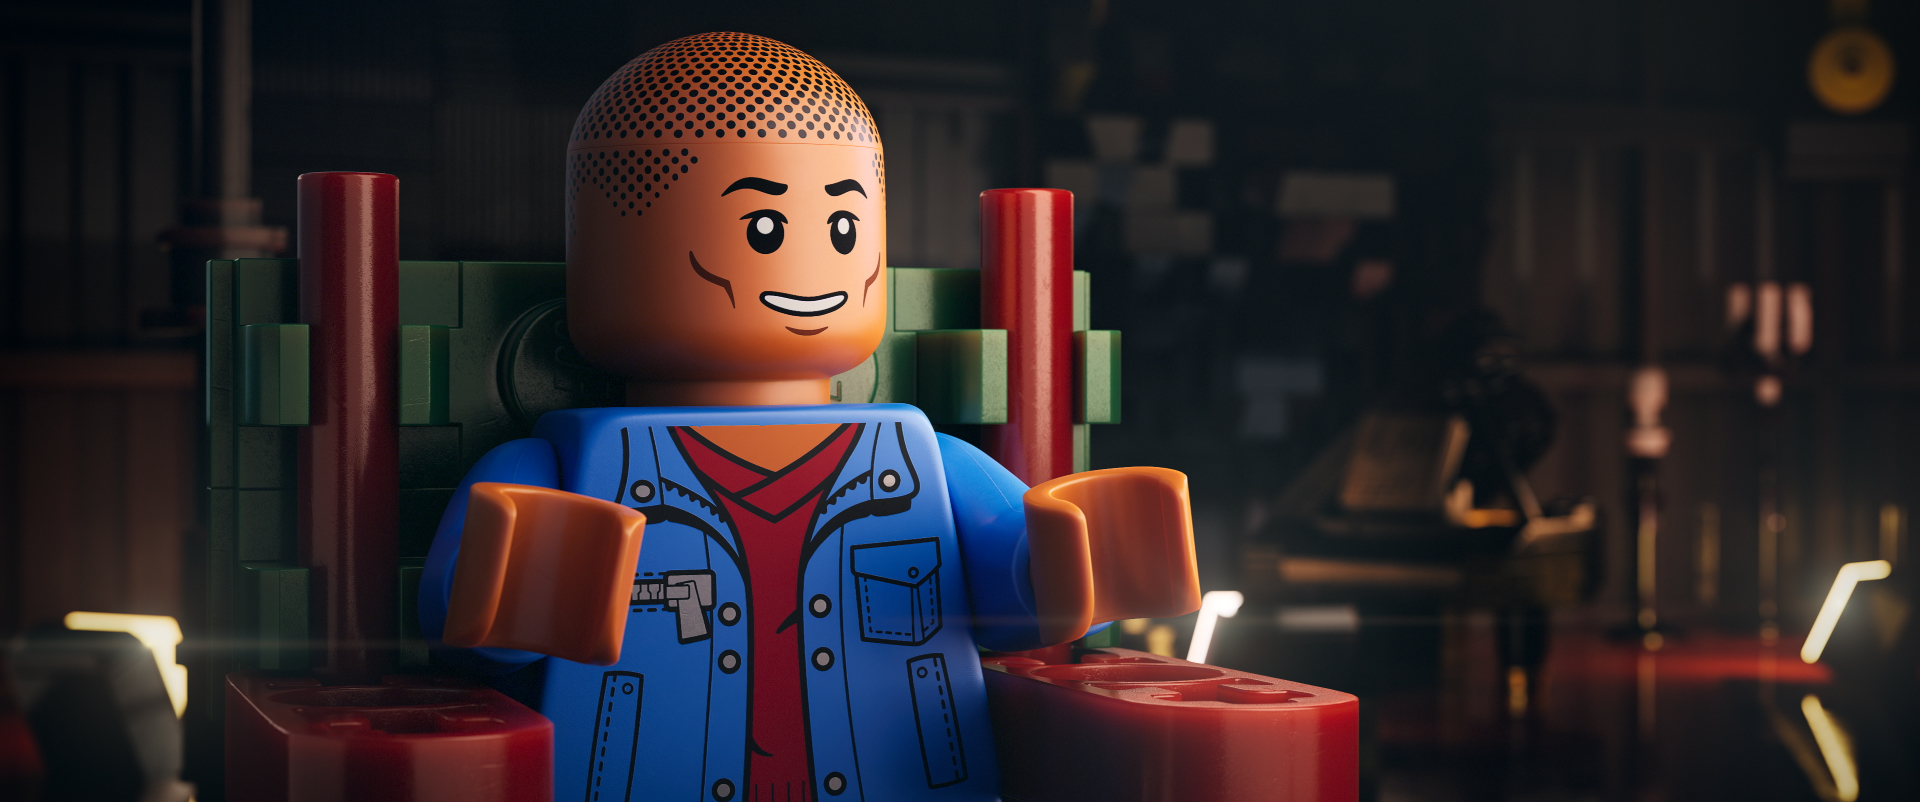 'Piece By Piece': Pharrell Williams' Animated Biopic Sees Kendrick Lamar, Jay-Z, Snoop Dogg And Busta Rhymes Turn Into LEGOs